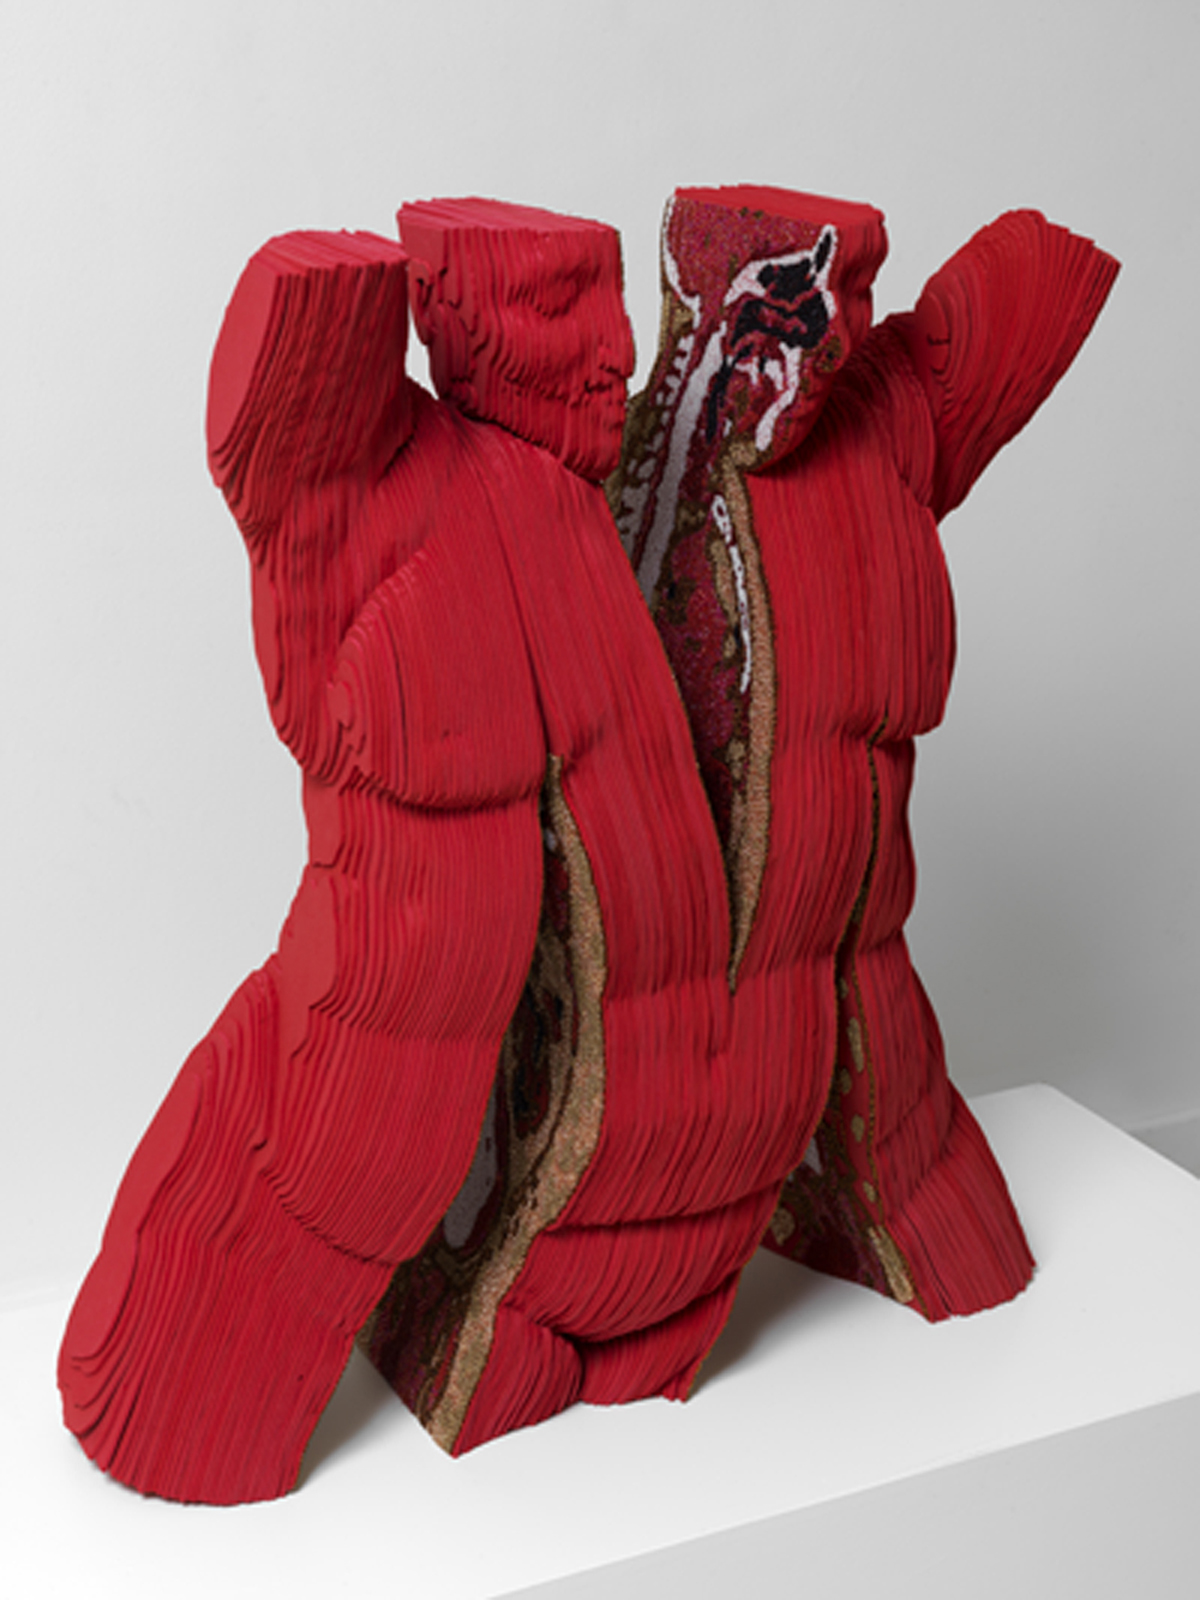 Split Petcetrix (2010), Foam Rubber, Bonded Nylon and Seed Beads, Edition of 3, H80 x W100 x D60cm